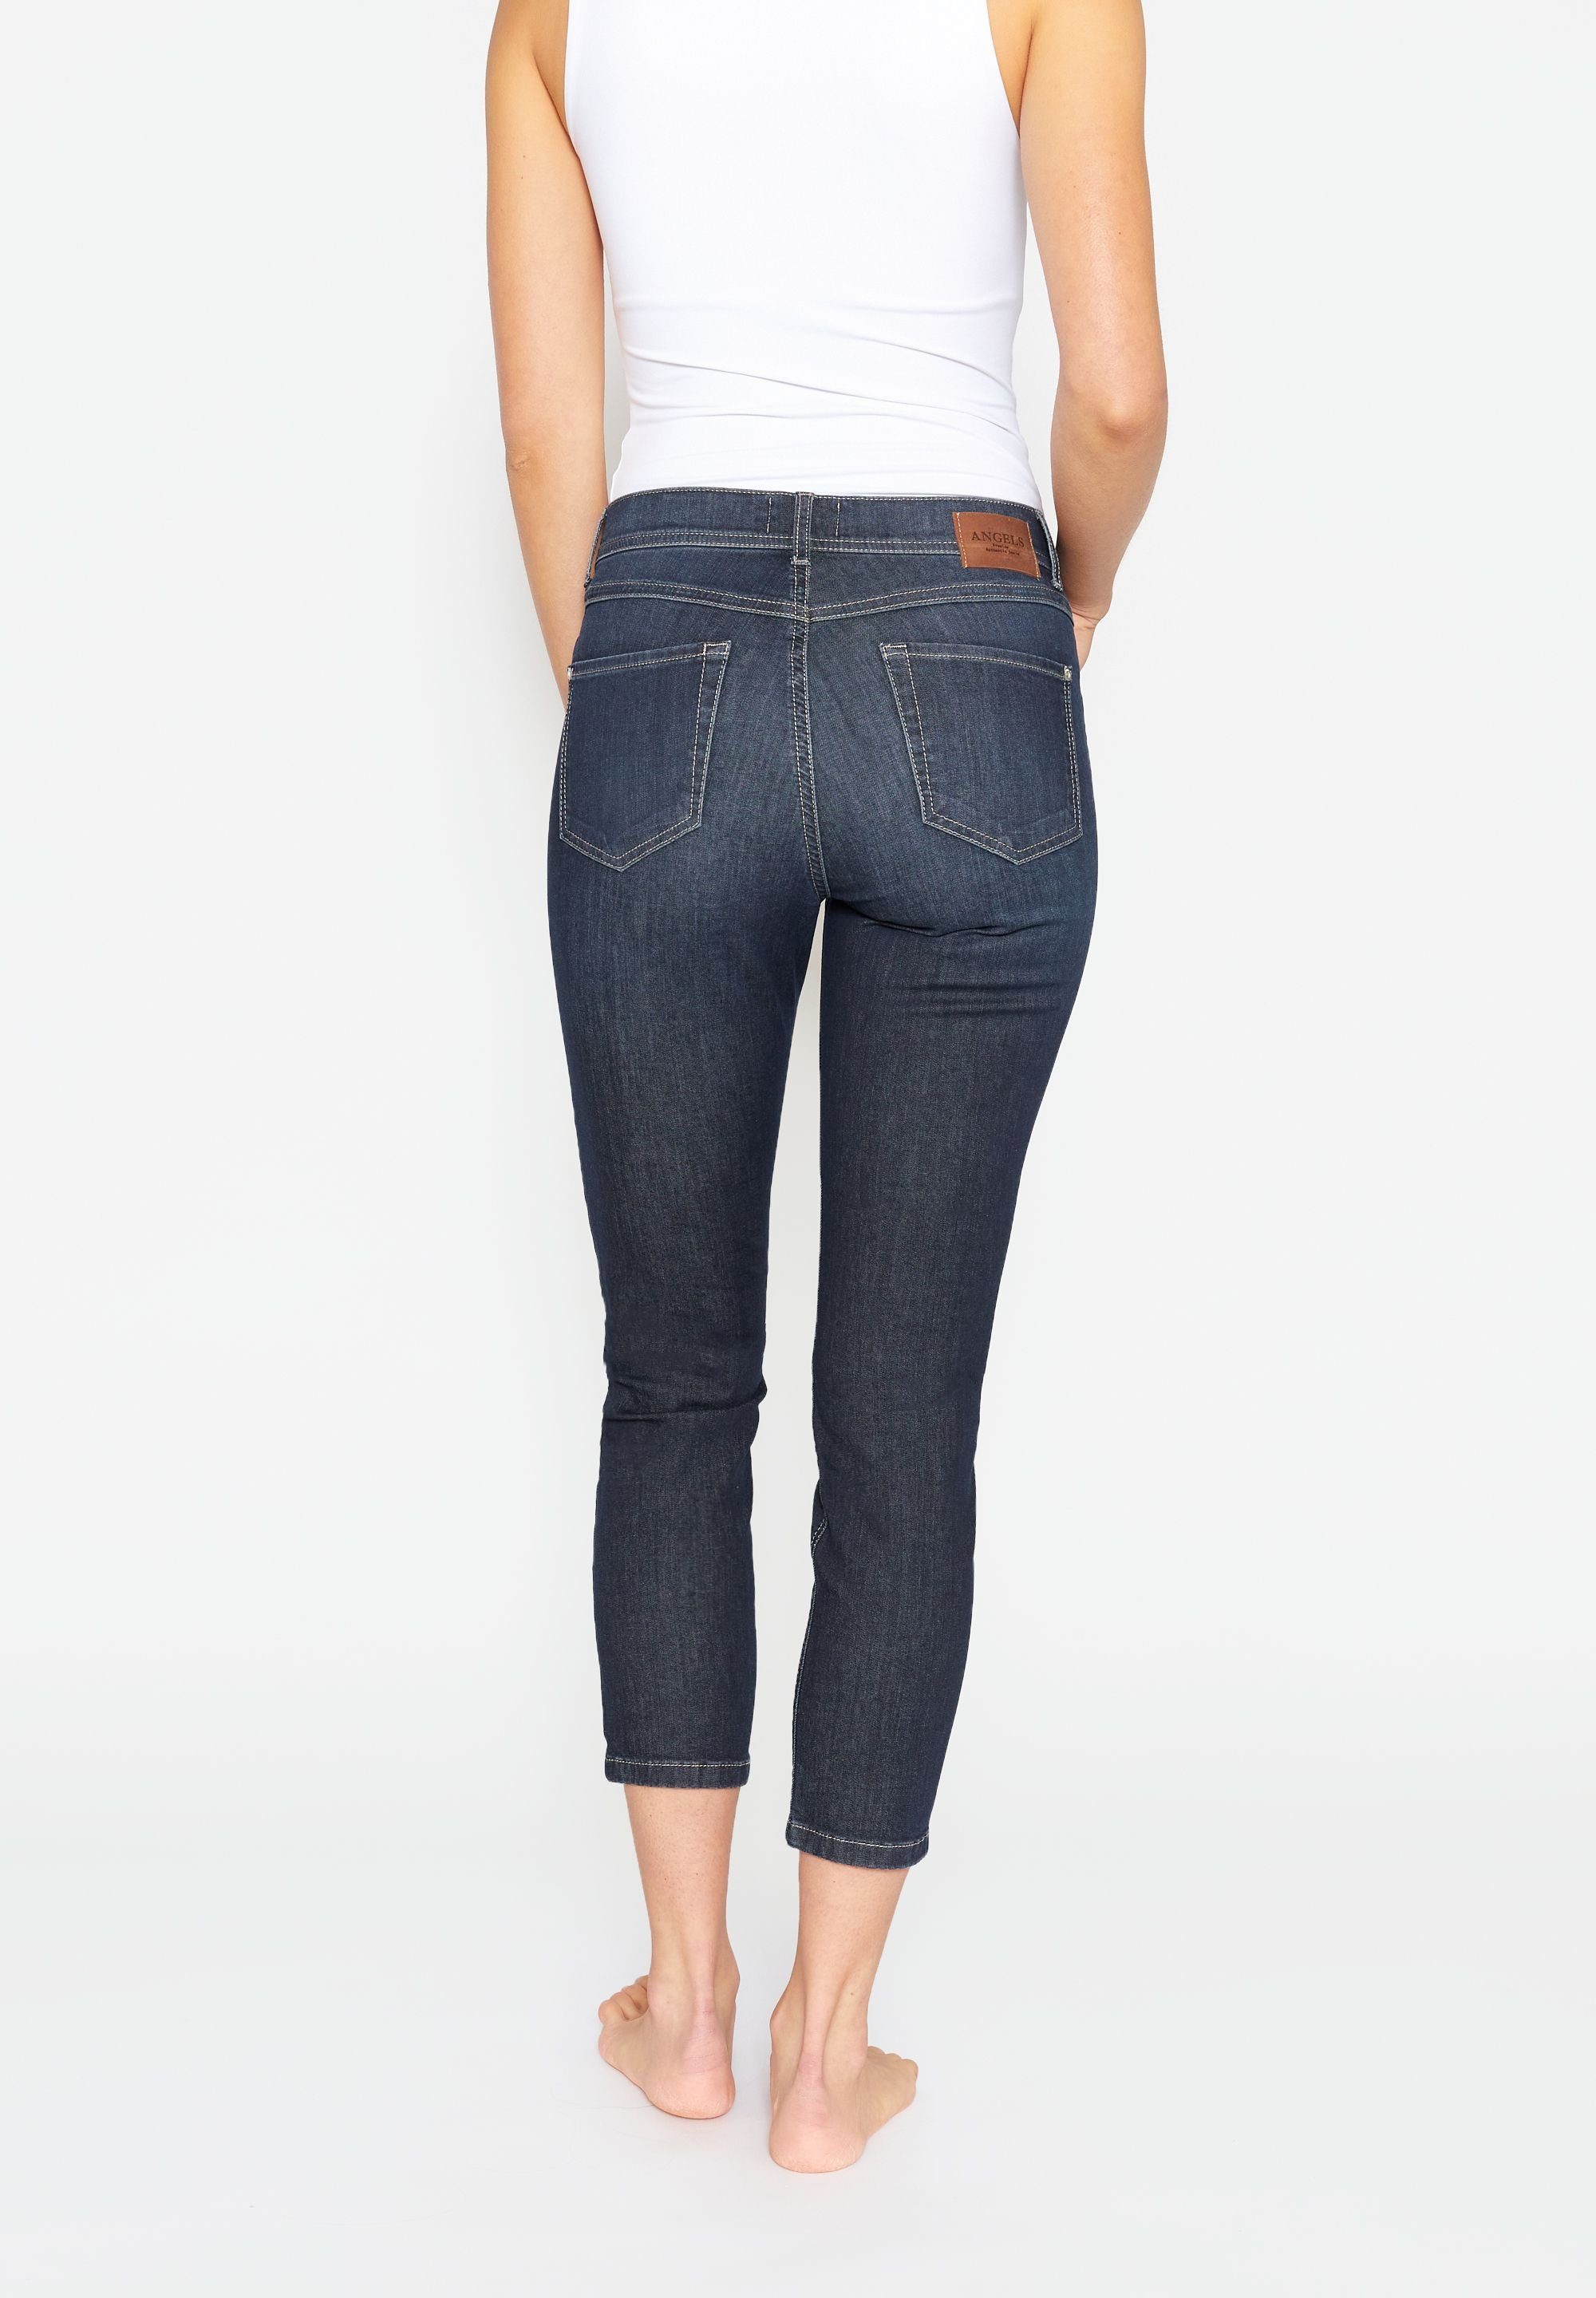 ANGELS blue 5-Pocket-Jeans used rinse night